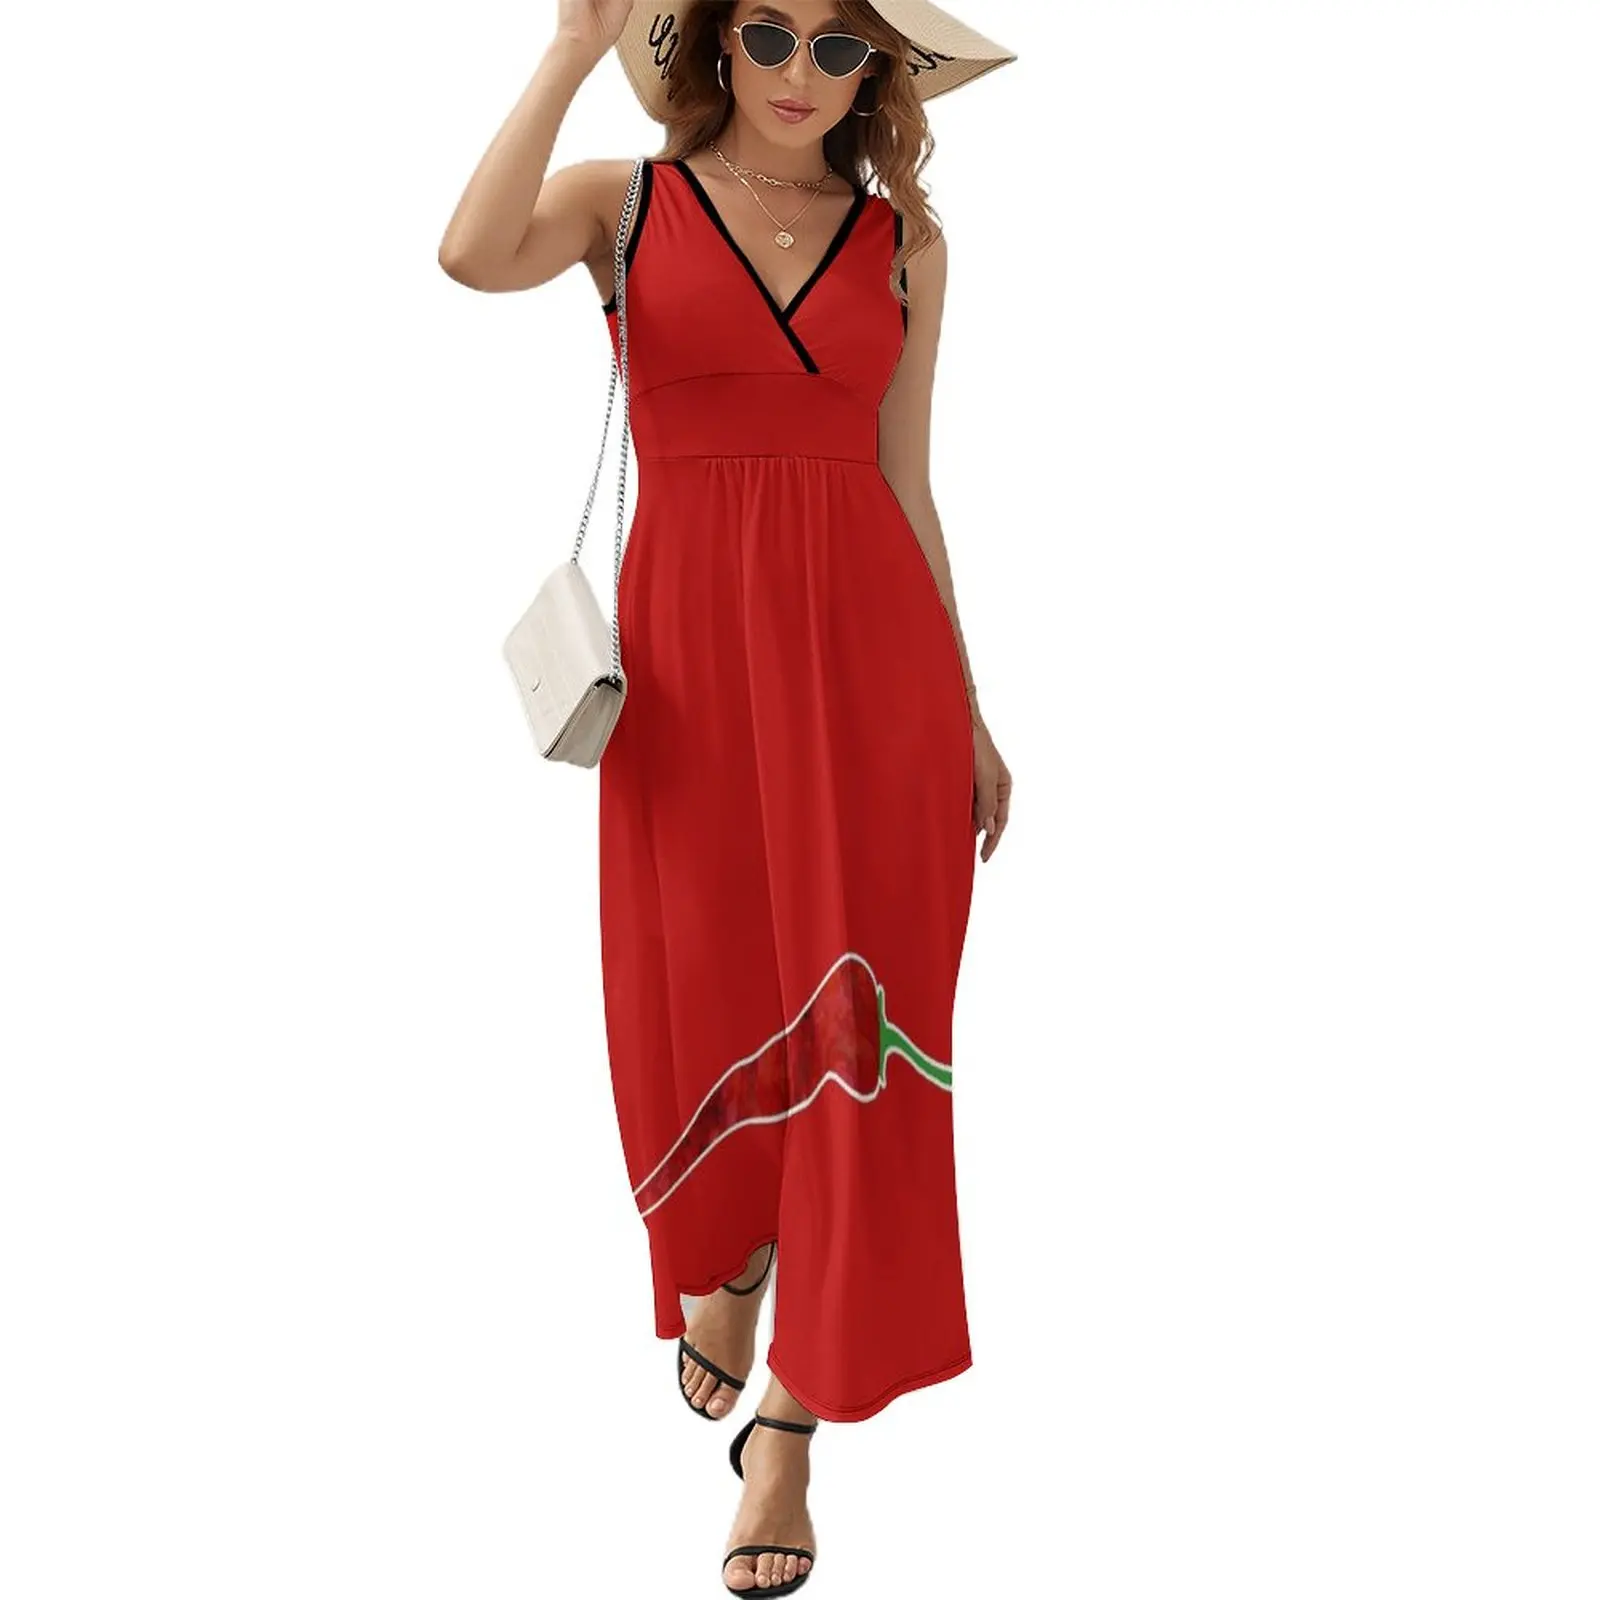 

Red Red Hot Chili Pepper Sleeveless Dress summer dress daily Female dress cocktail dresses Evening gown